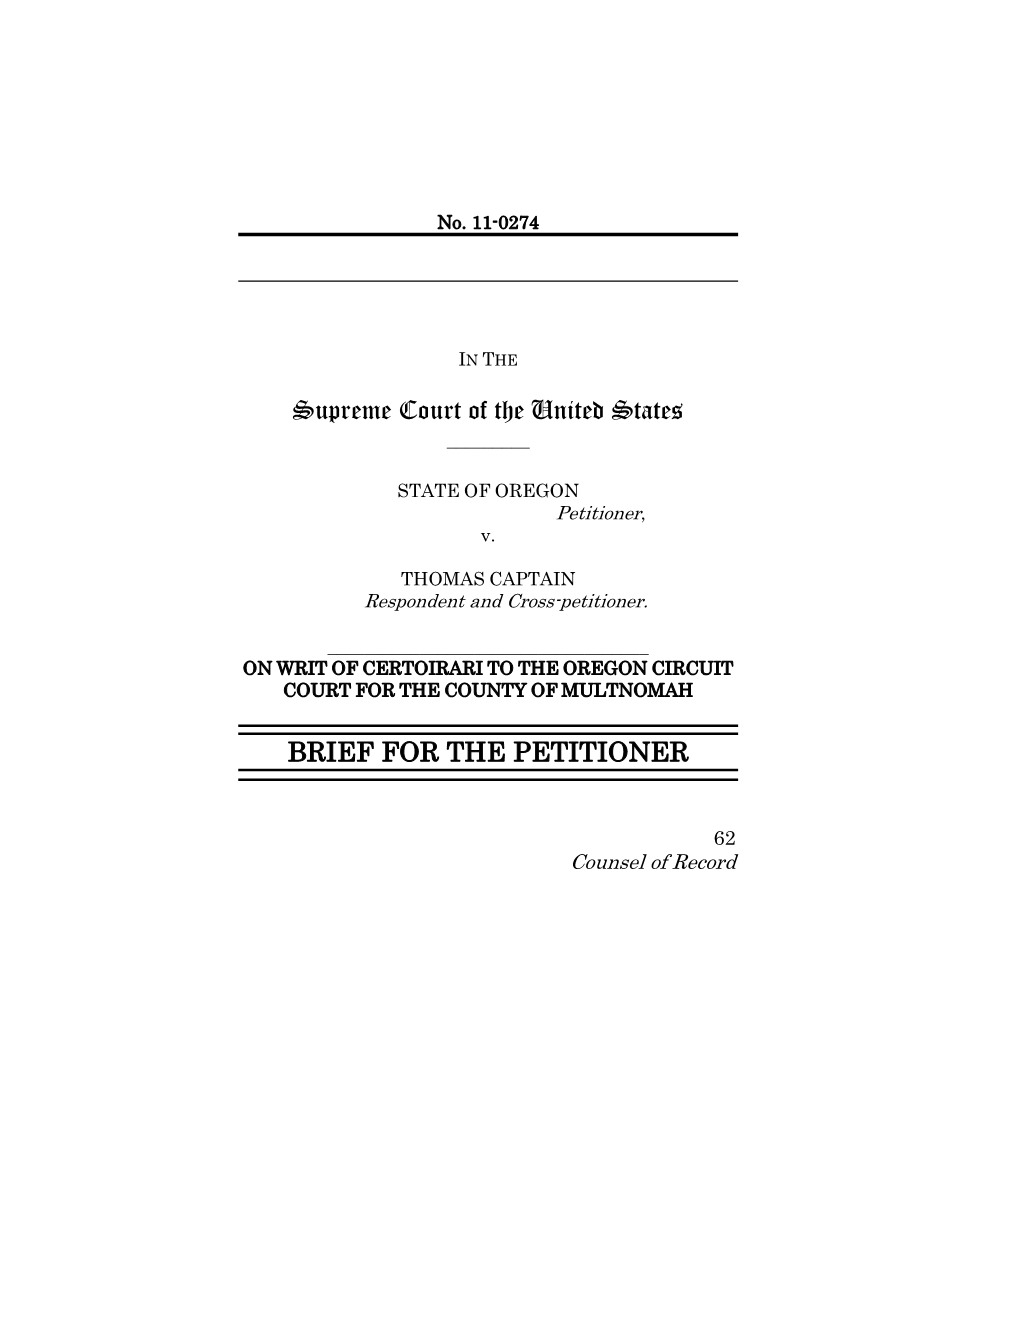 Supreme Court of the United States BRIEF for the PETITIONER